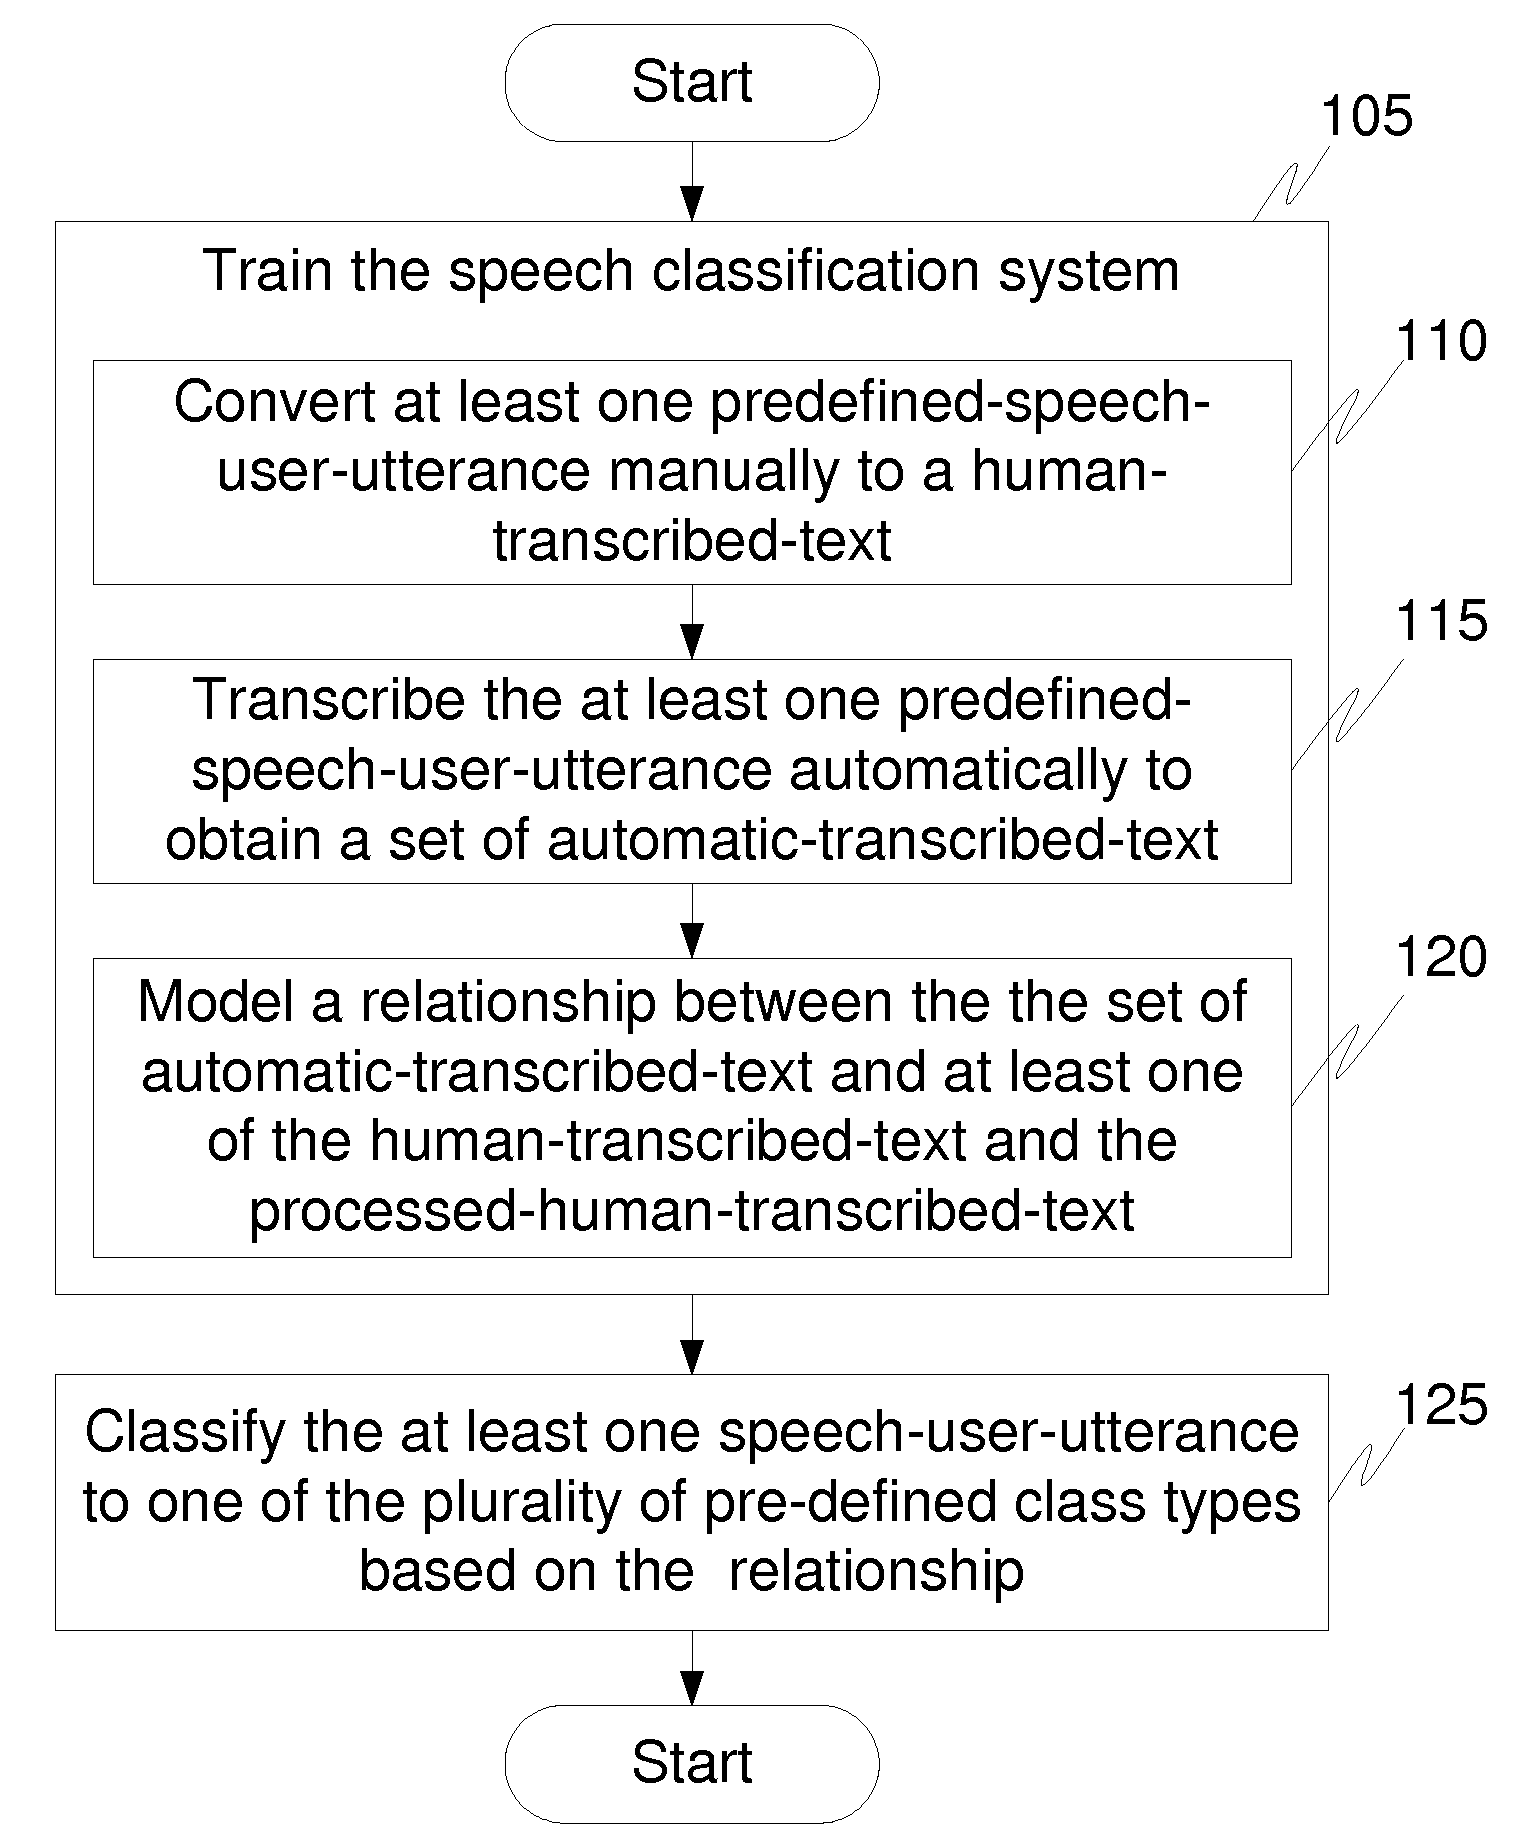 A method and system for speech classification